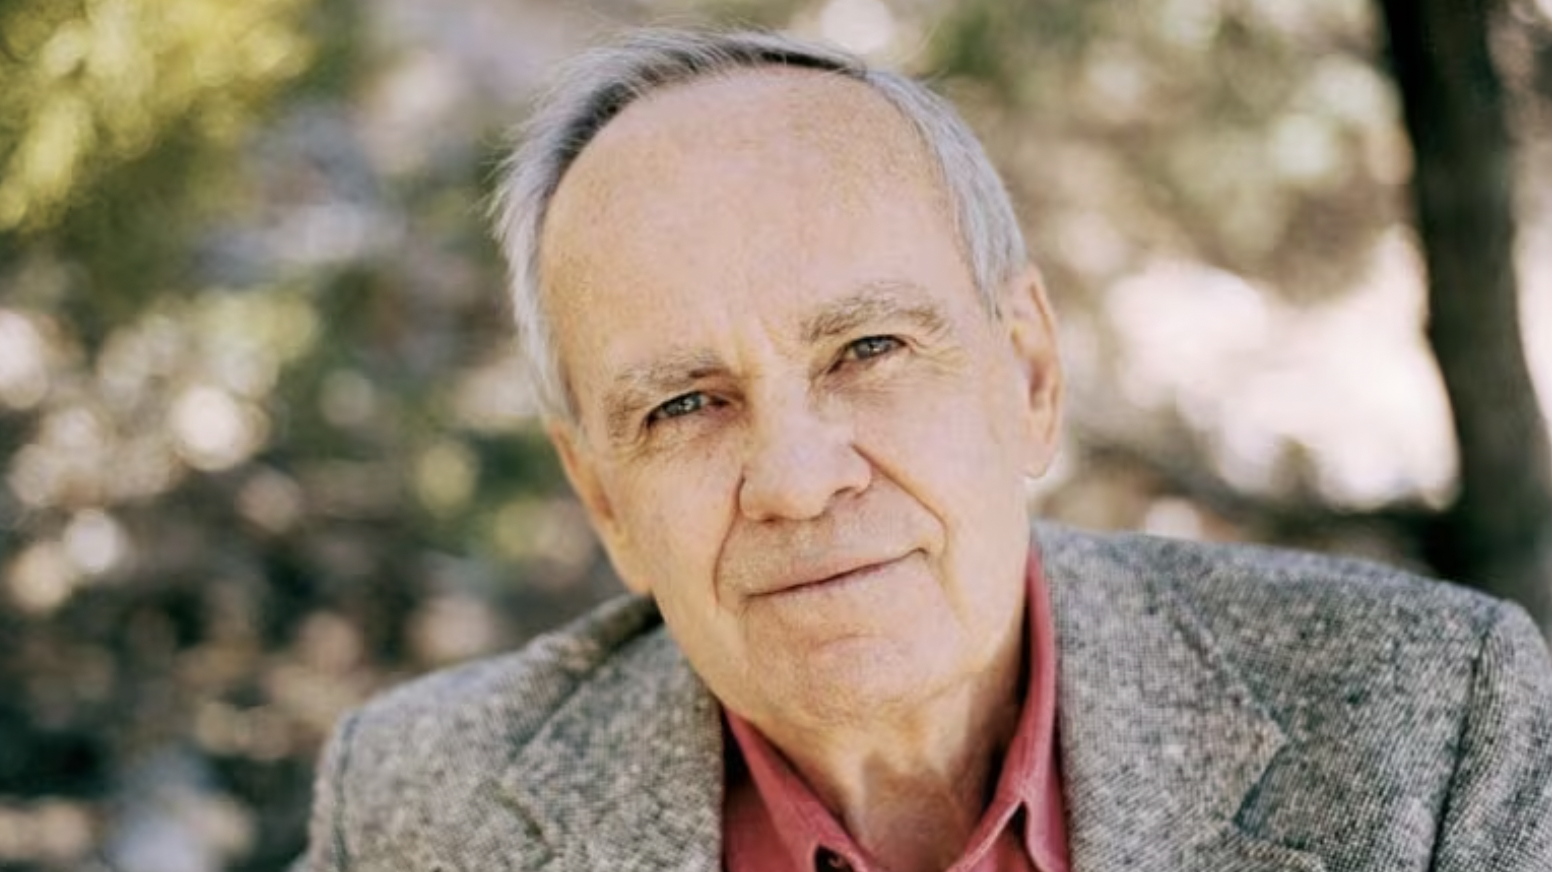 Cormac McCarthy, Dead at 89